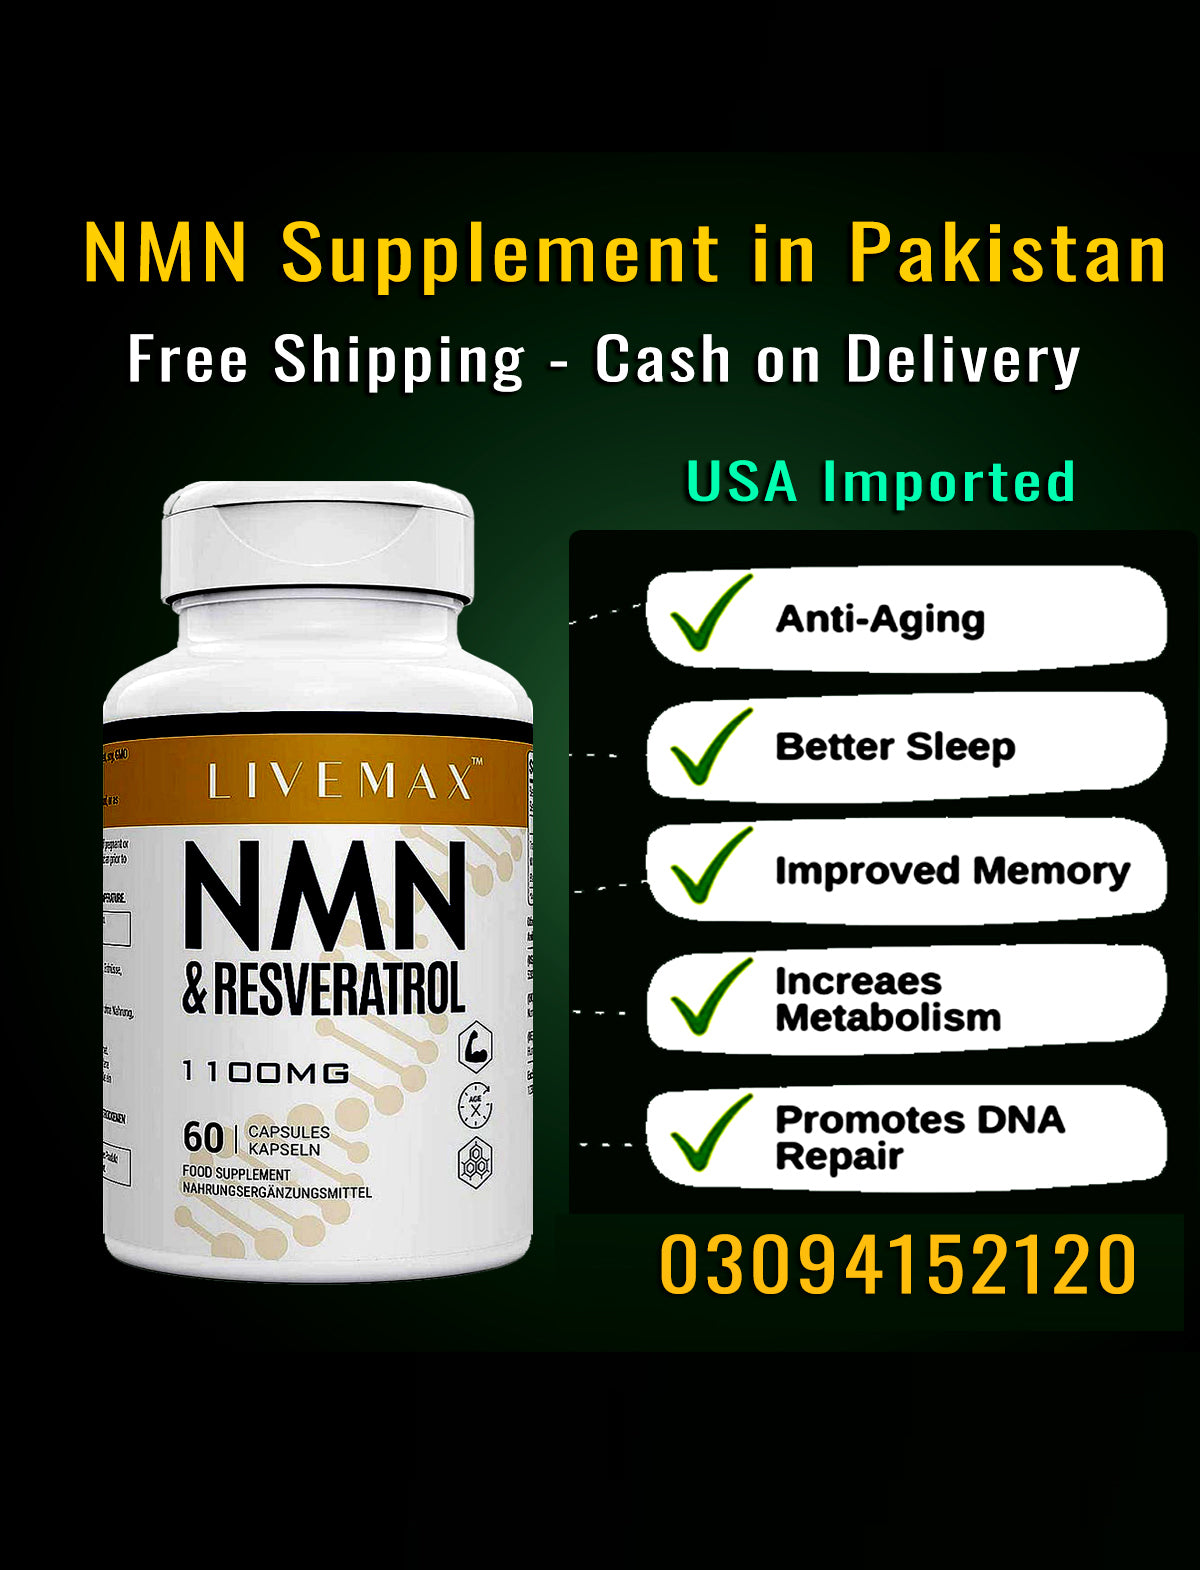 IMPORTED-NMN-FOOD-SUPPLEMENTS-IN-PAKISTAN